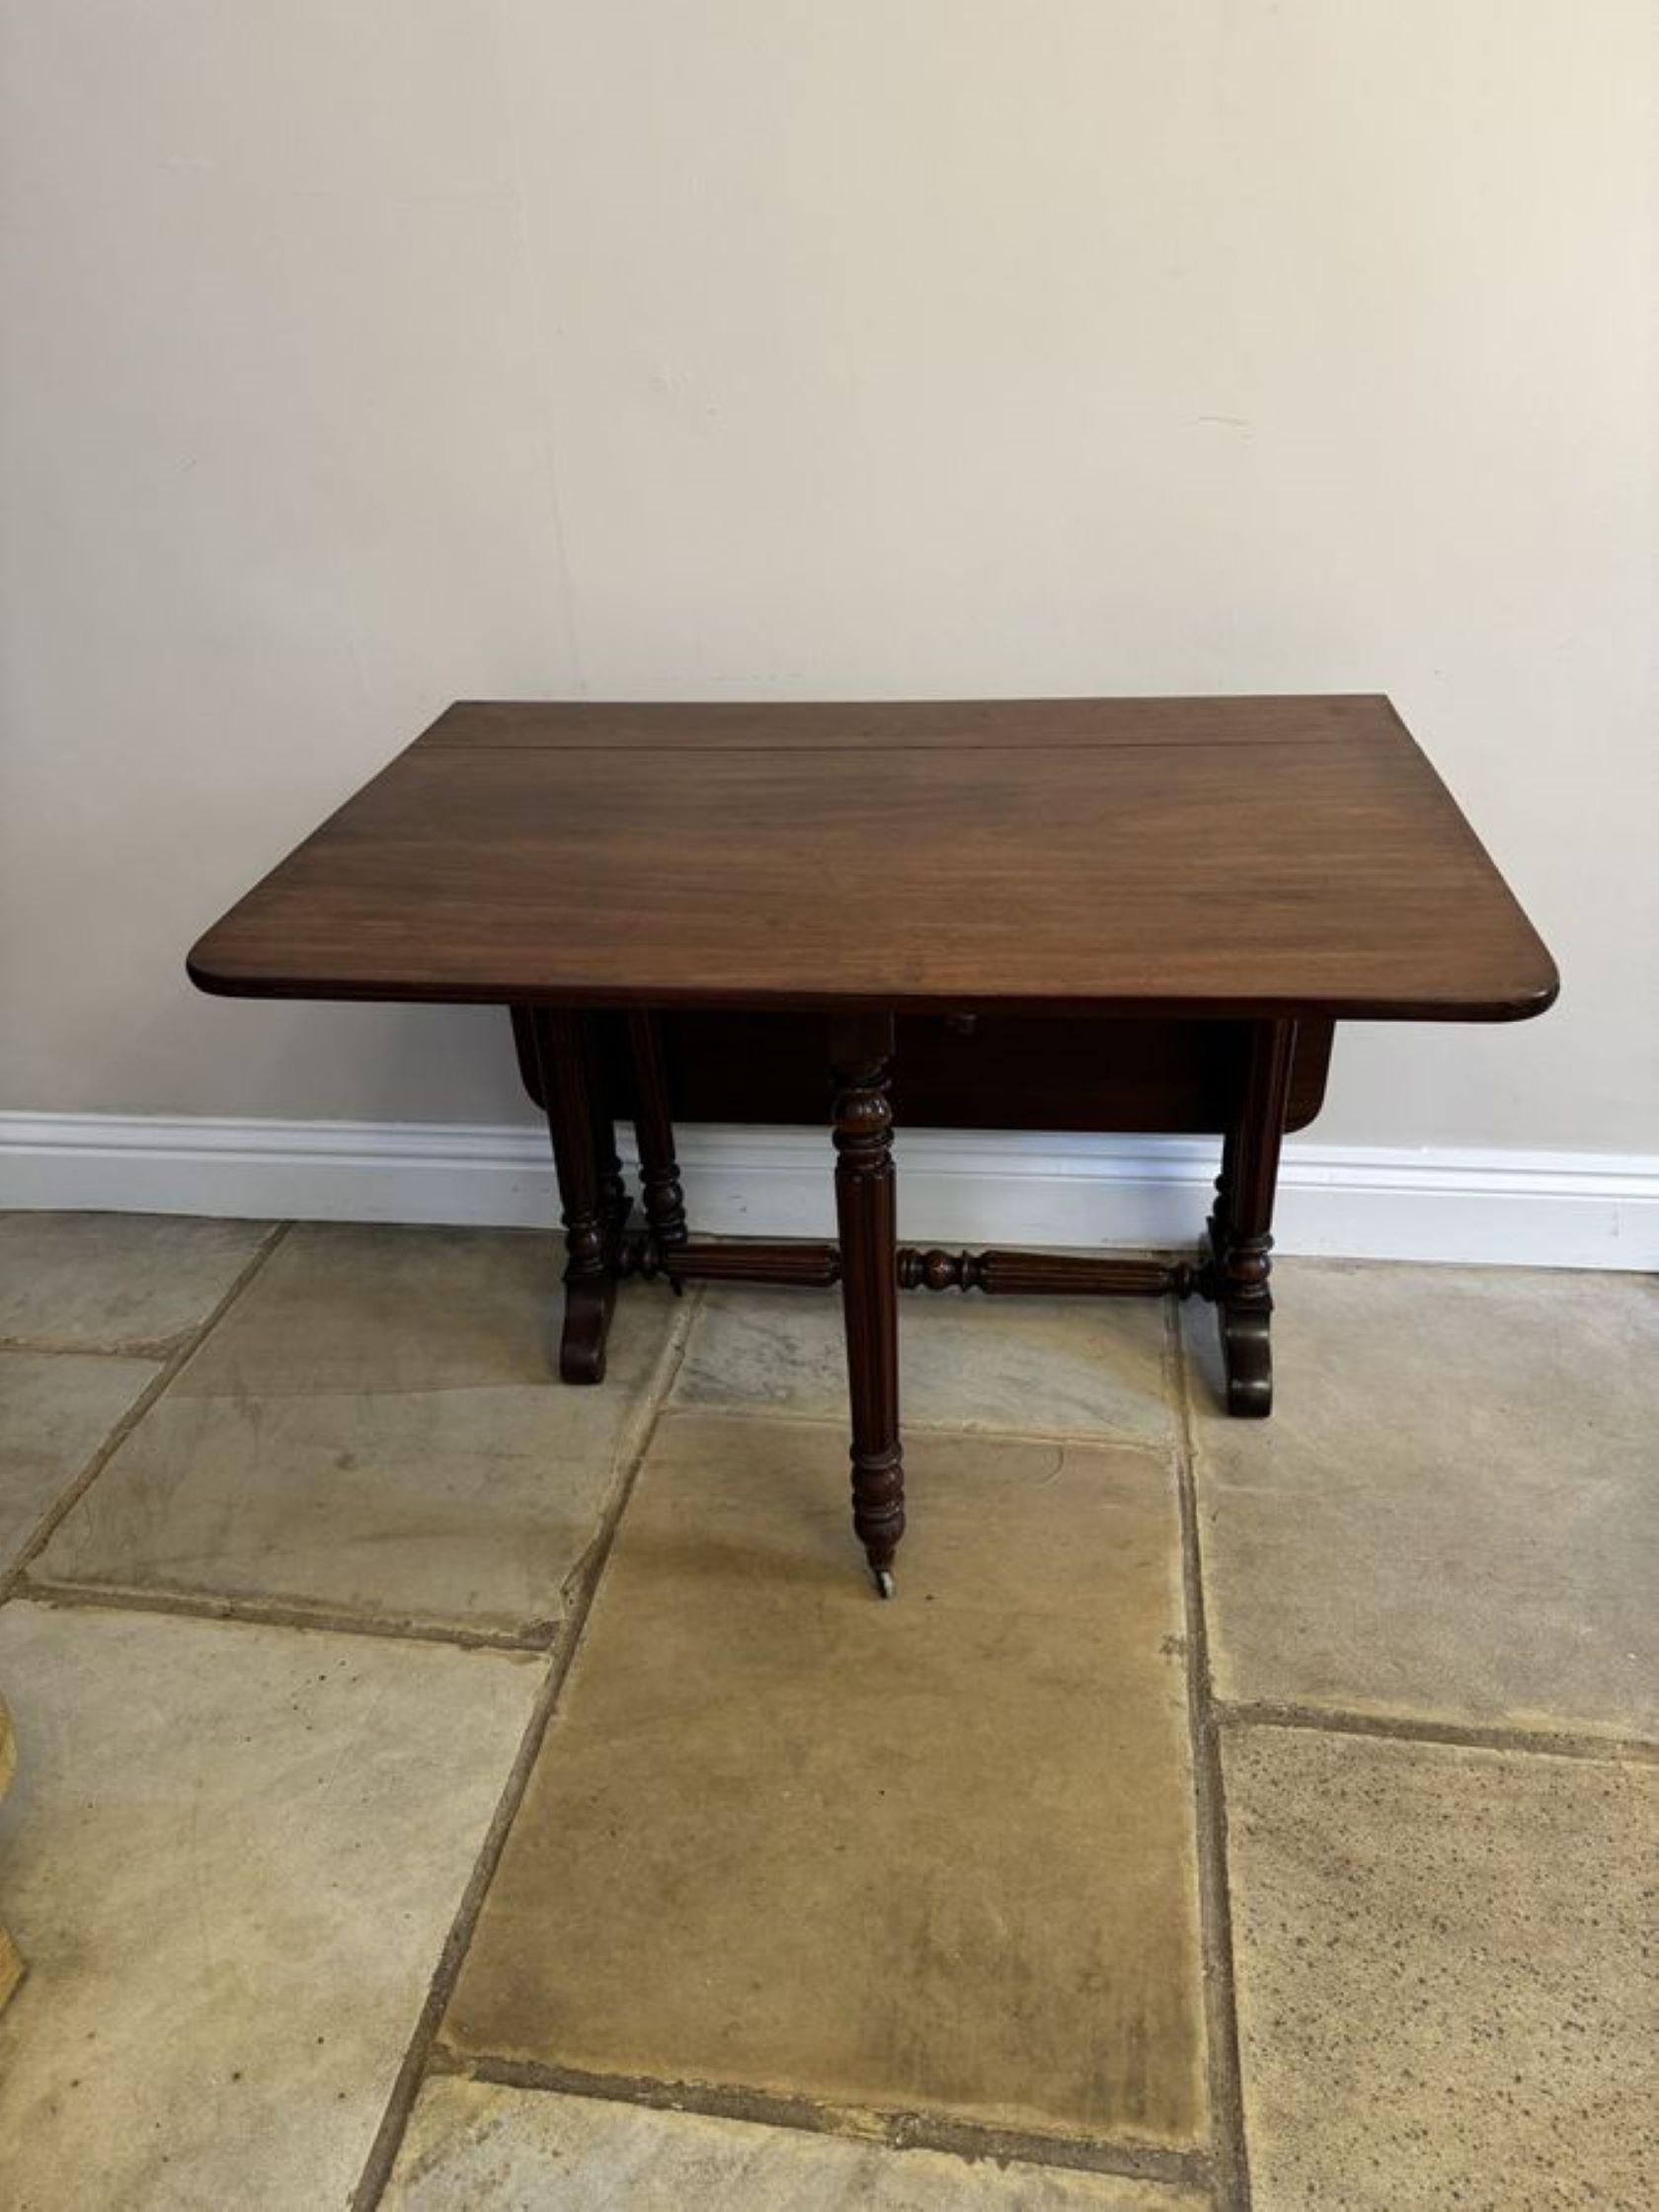 Antique Victorian quality mahogany Sutherland table, having a quality mahogany top with two drop leaves supported by reeded columns, having two swing out legs with original castors standing on cabriole legs united by a reeded stretcher.

Dimensions